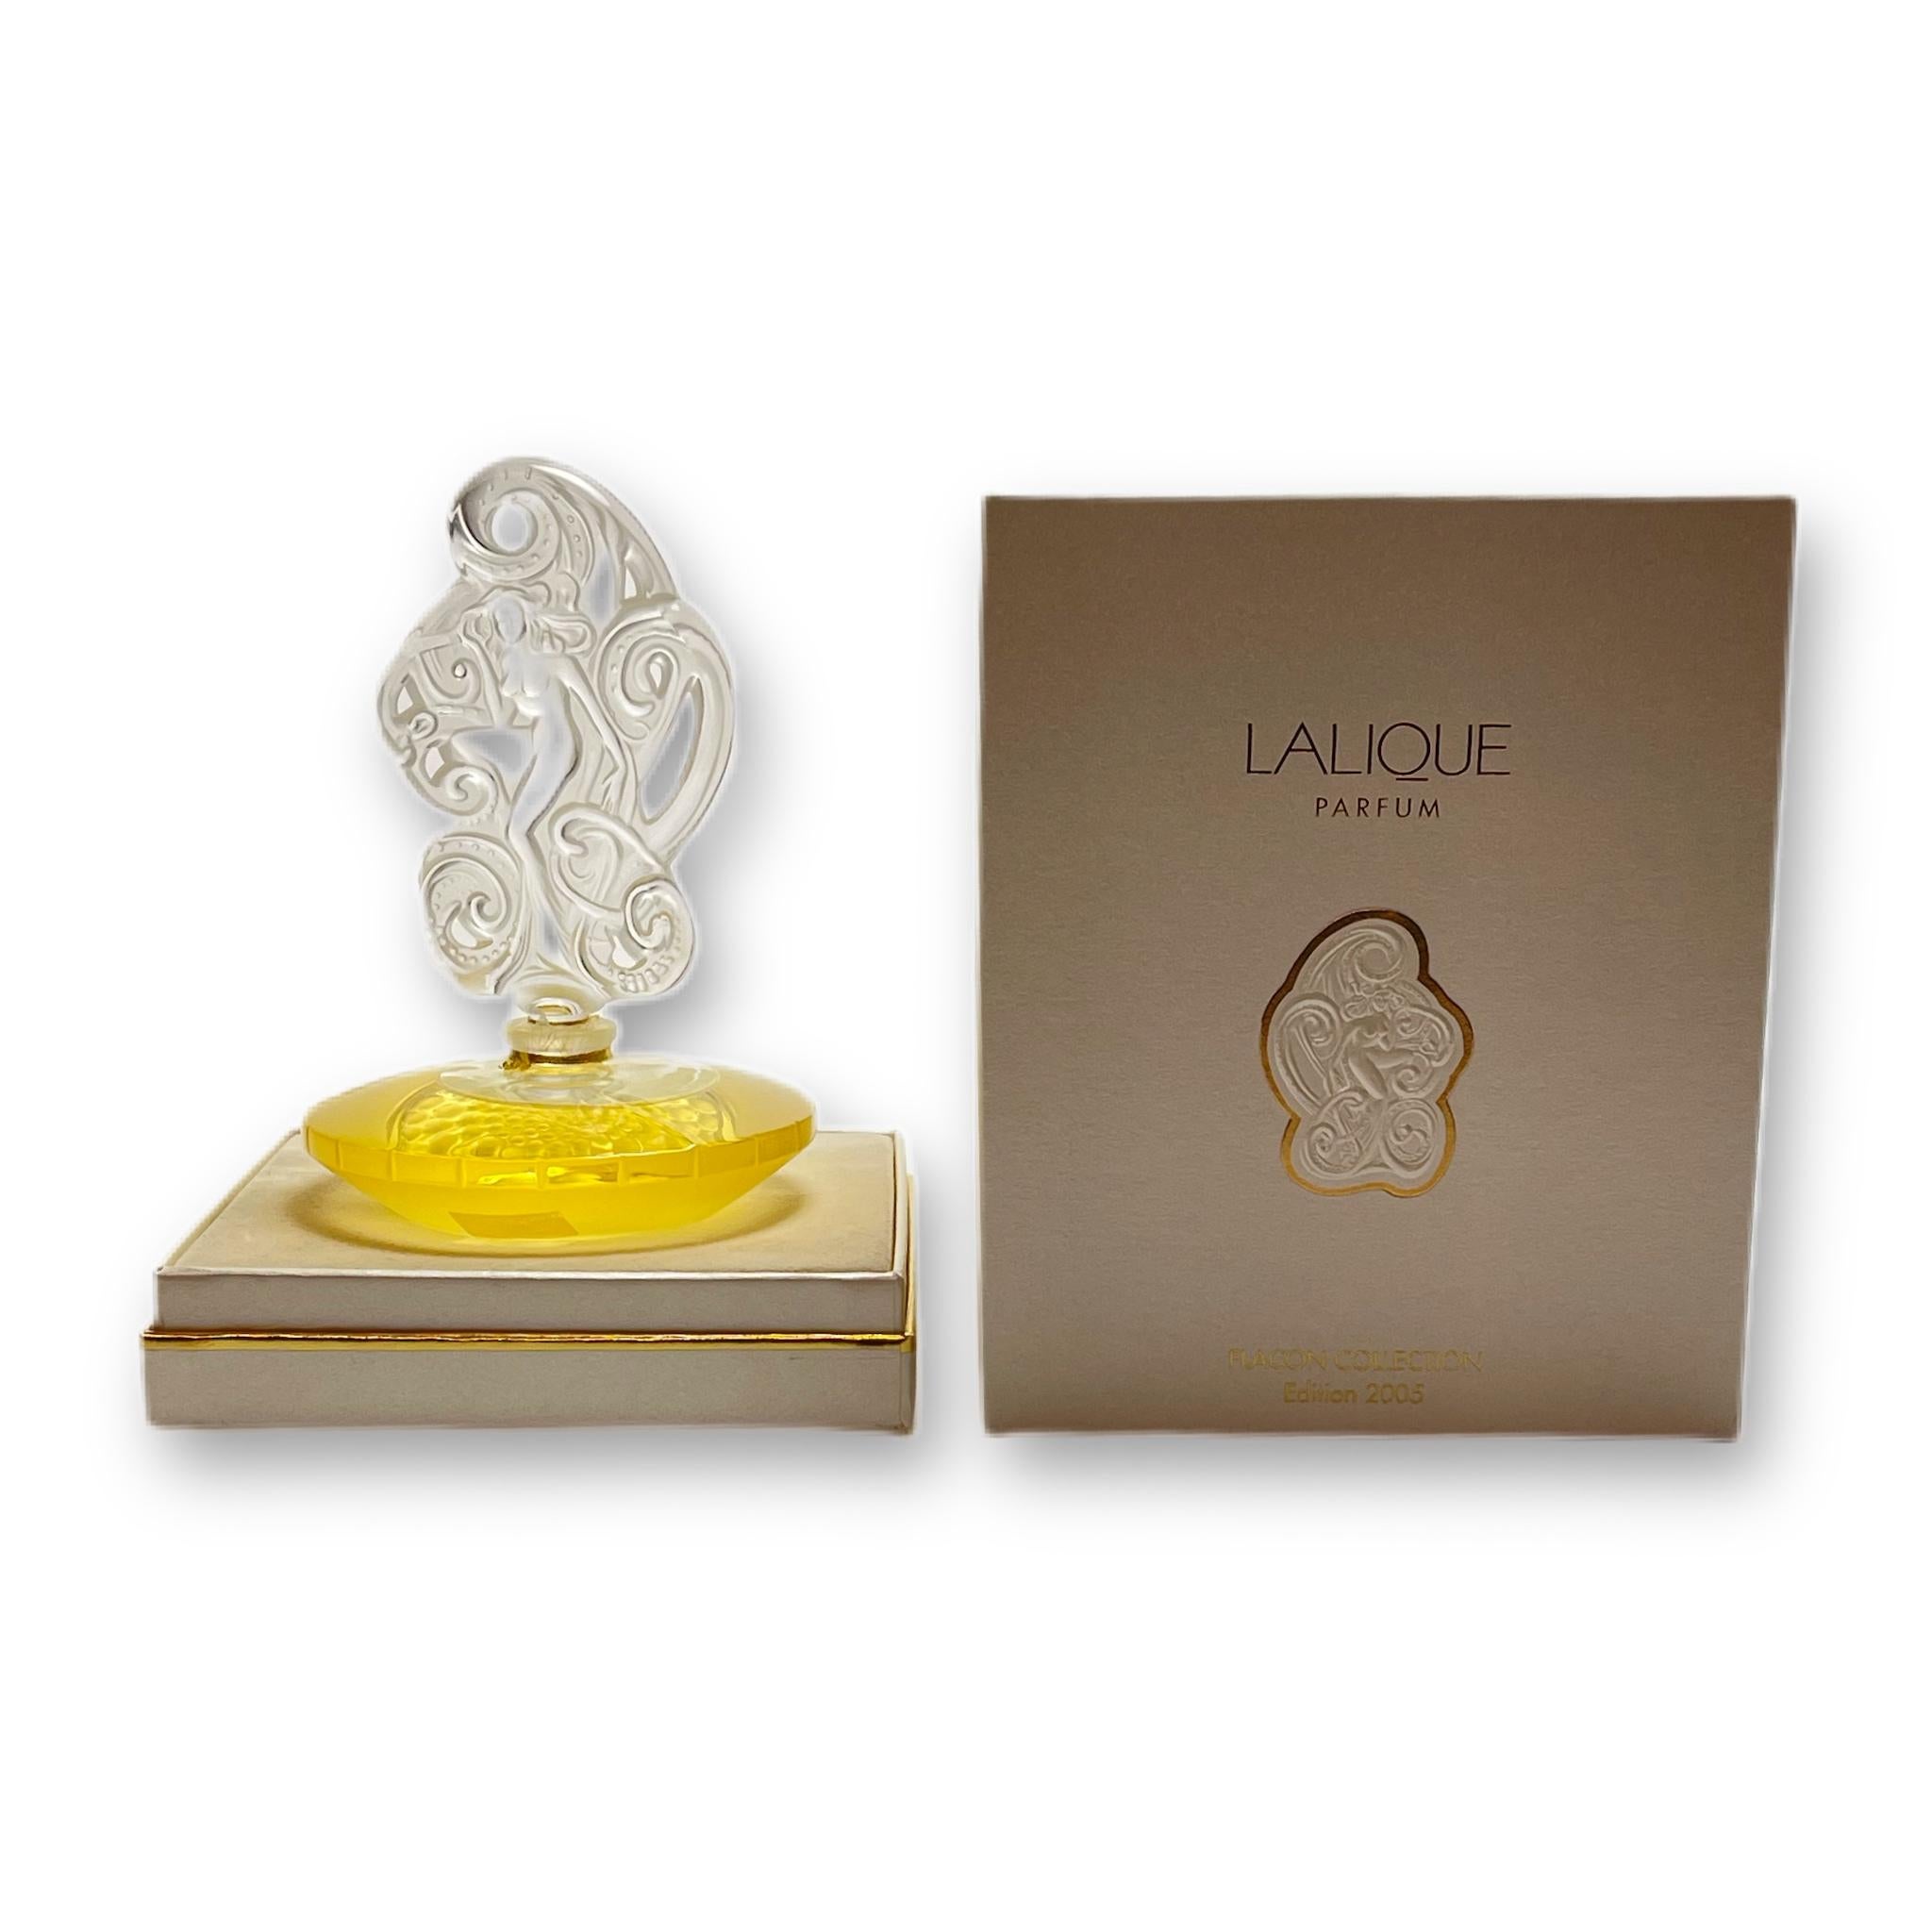 Limited Edition Glass Perfume Bottle entitled 